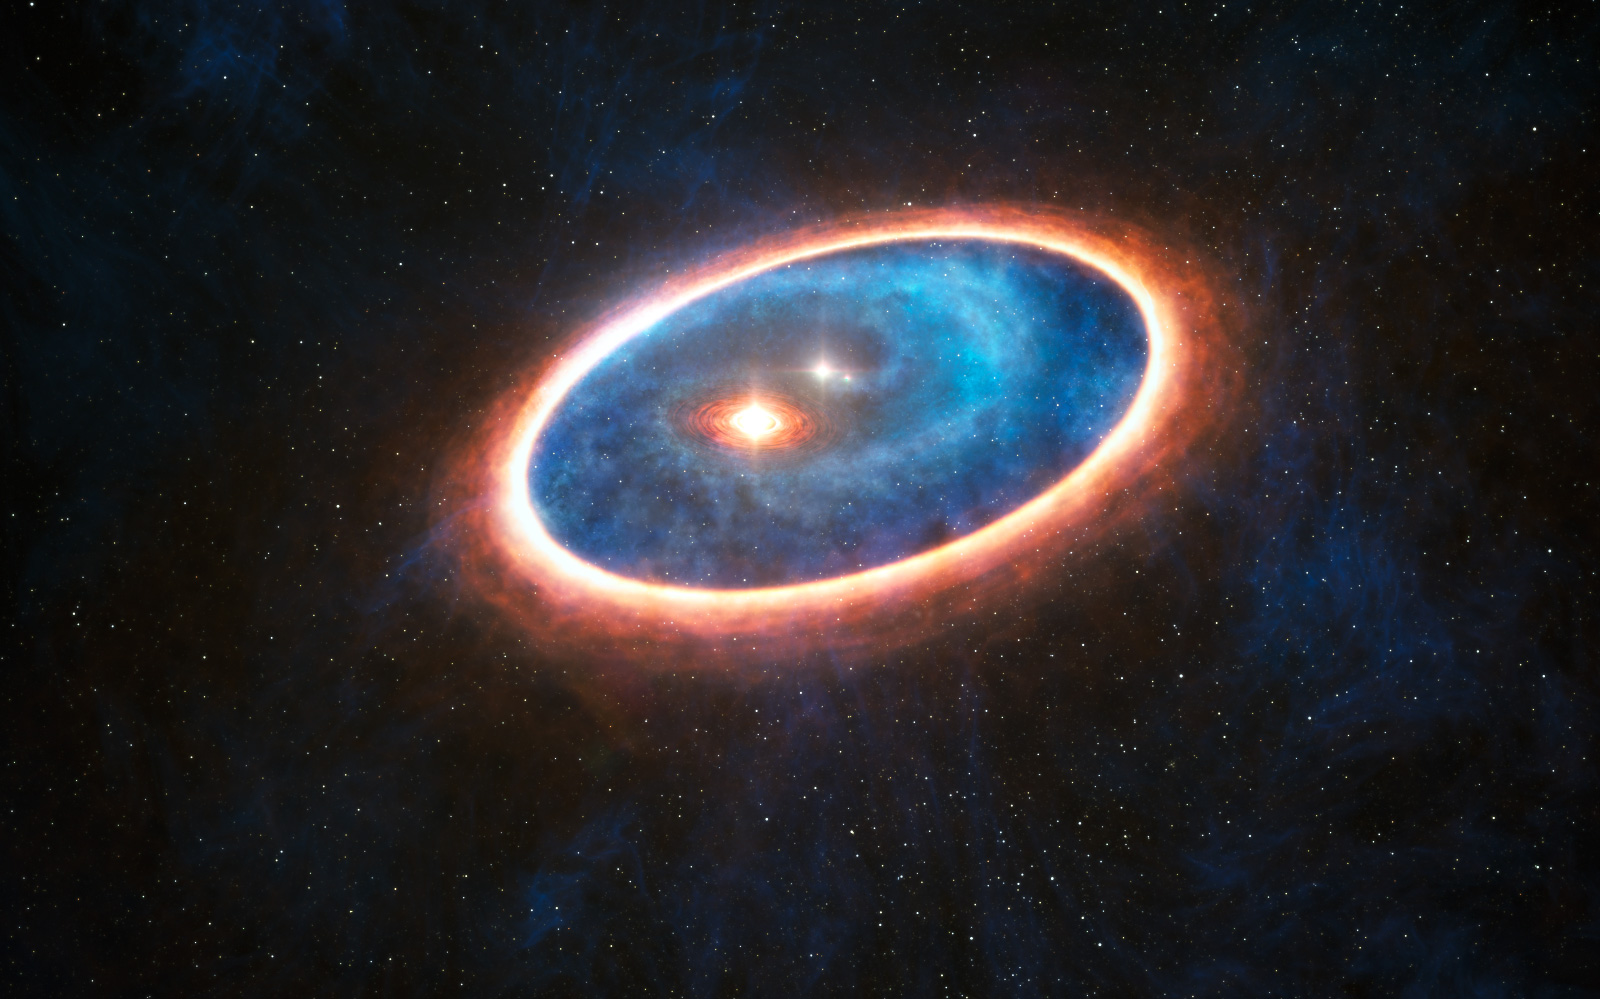 <p>This artist’s impression shows the dust and gas around the double star system GG Tauri-A. Researchers using ALMA have detected gas in the region between two discs in this binary system. This may allow planets to form in the gravitationally perturbed environment of the binary. Half of Sun-like stars are born in binary systems, meaning that these findings will have major consequences for the hunt for exoplanets. Credit: ESO/L. Calçada</p>
